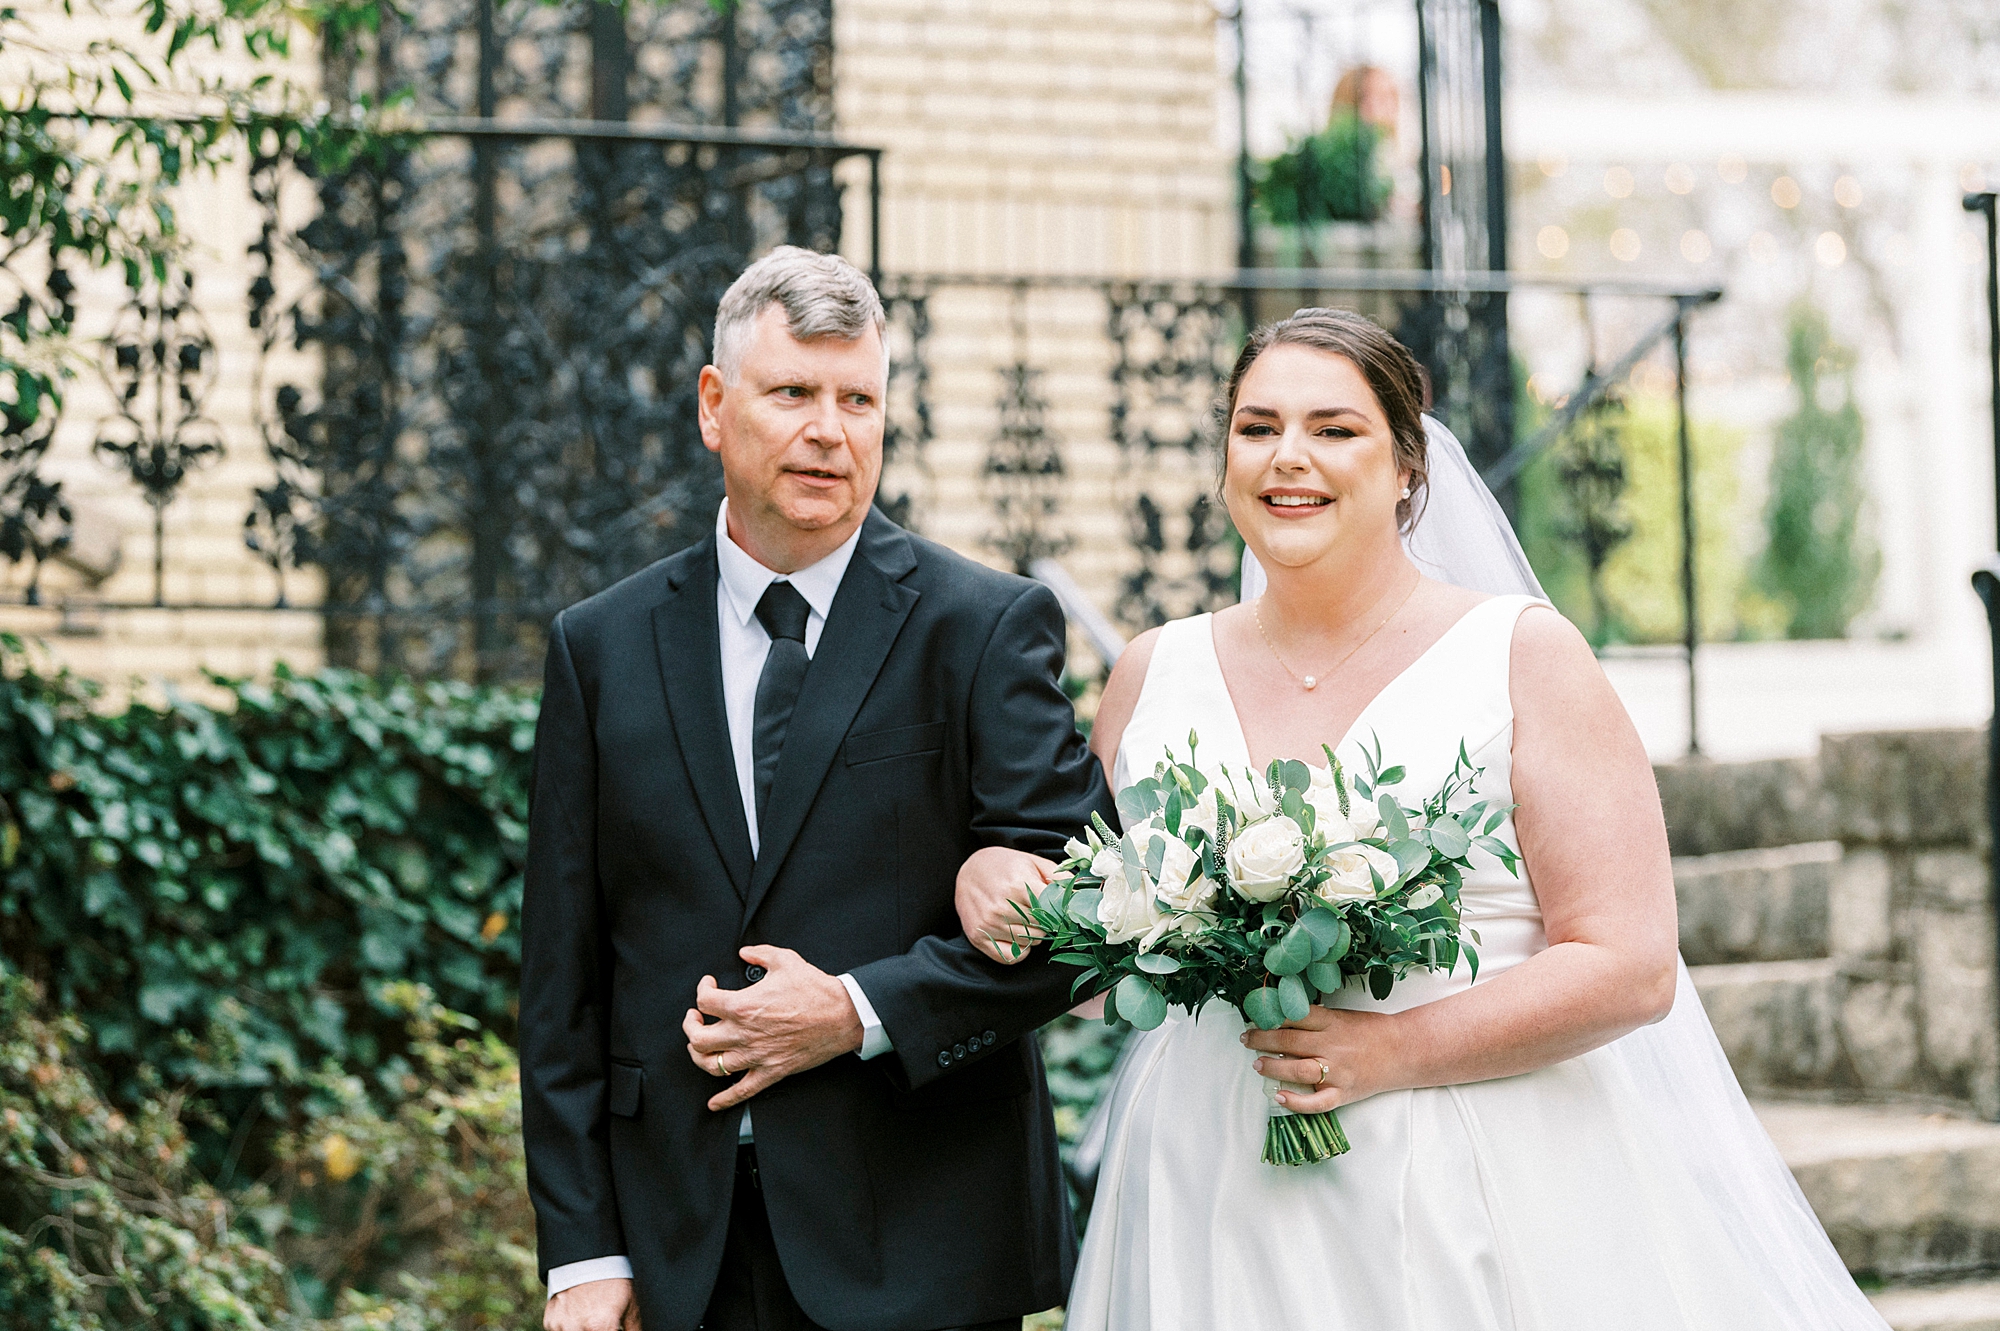 dad walks bride down aisle for outdoor ceremony at the Separk Mansion